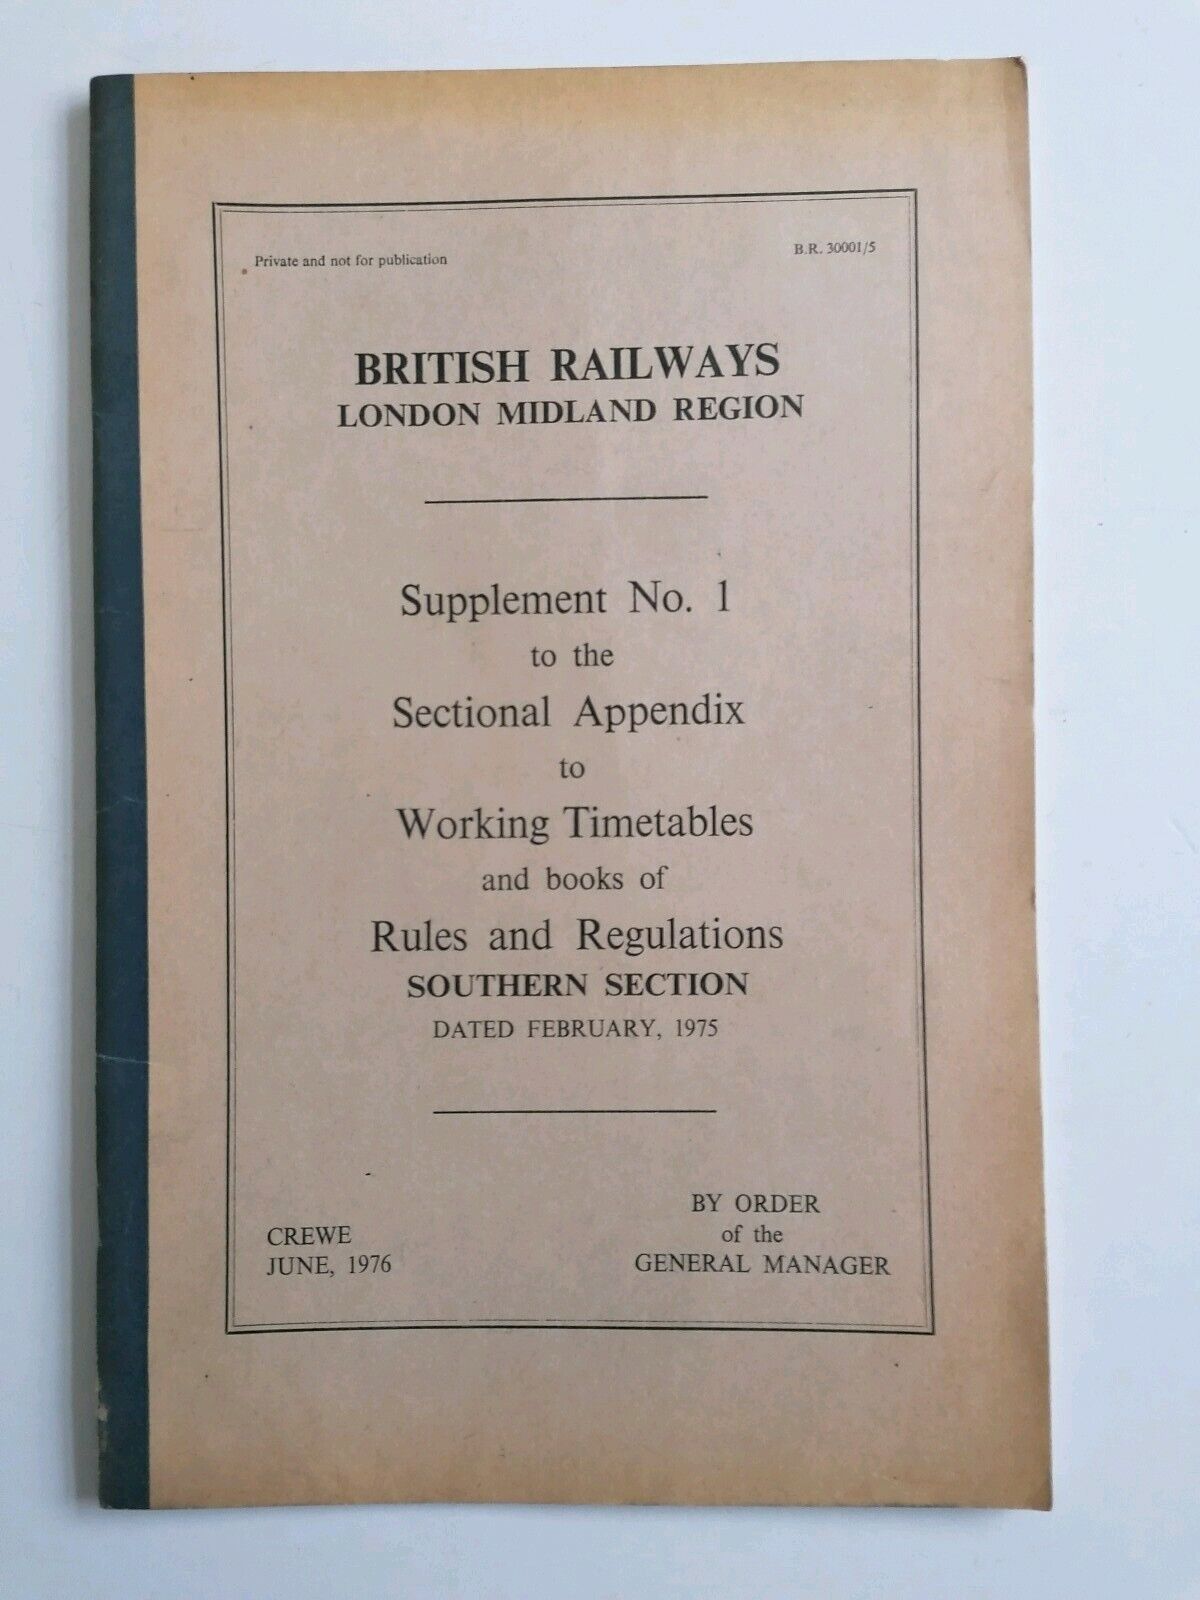 British Railways - BR30001/5 - Supplement No.1 to the Sectional Appendix - 1976